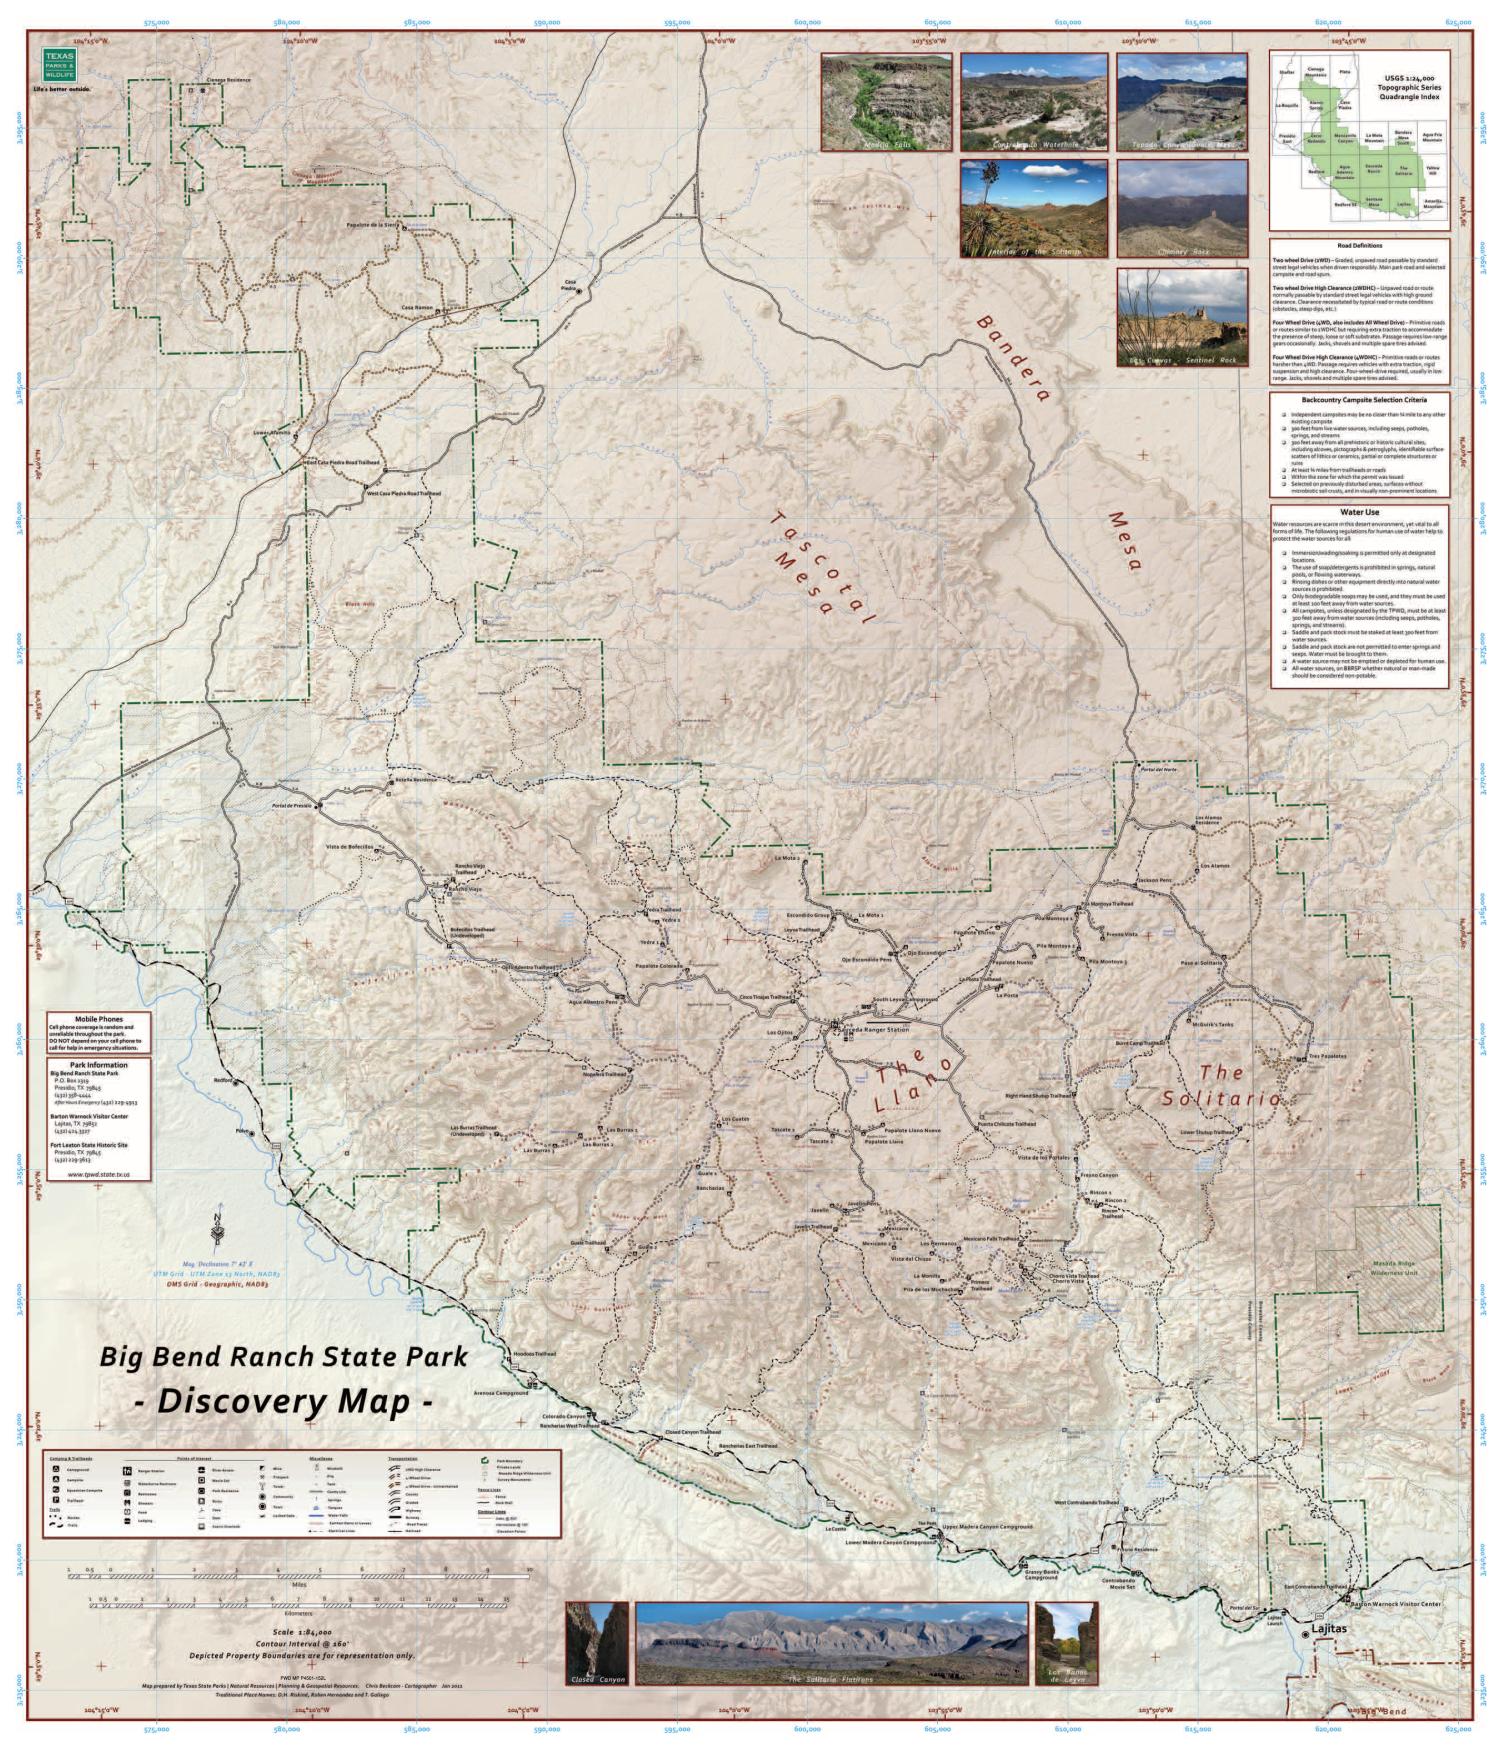 Big Bend Ranch State Park Discovery Map The Portal To Texas History